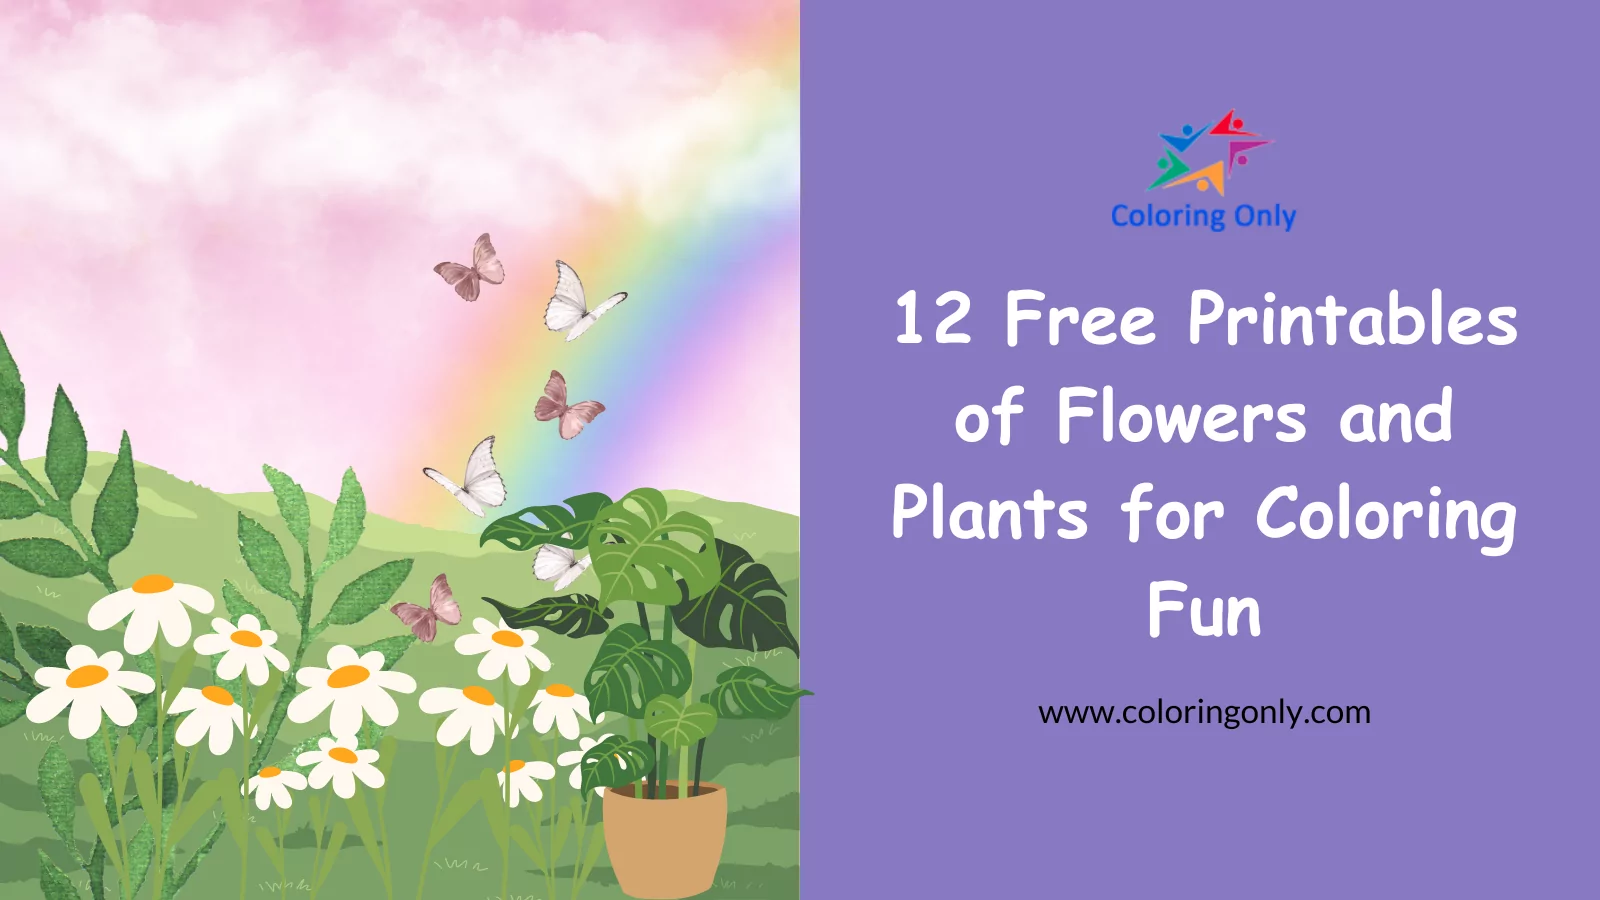 Copy of C12 Free Printables of Flowers and Plants for Coloring FunO Blog template (6)